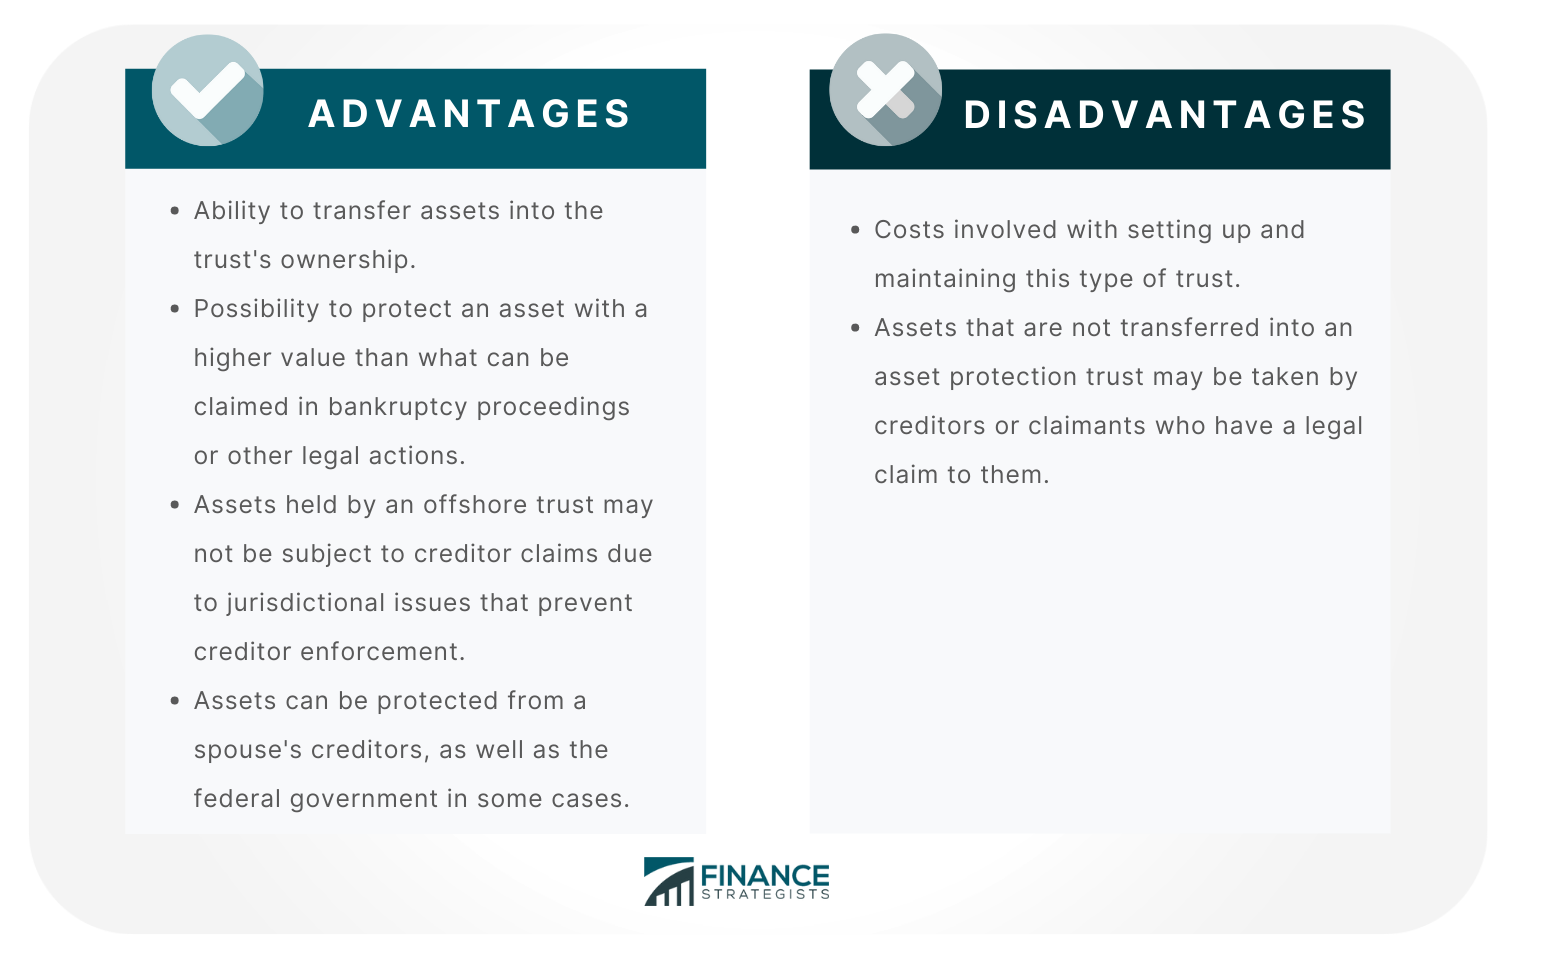 Advantages_and_Disadvantages_of_Using_an_Asset_Protection_Trust